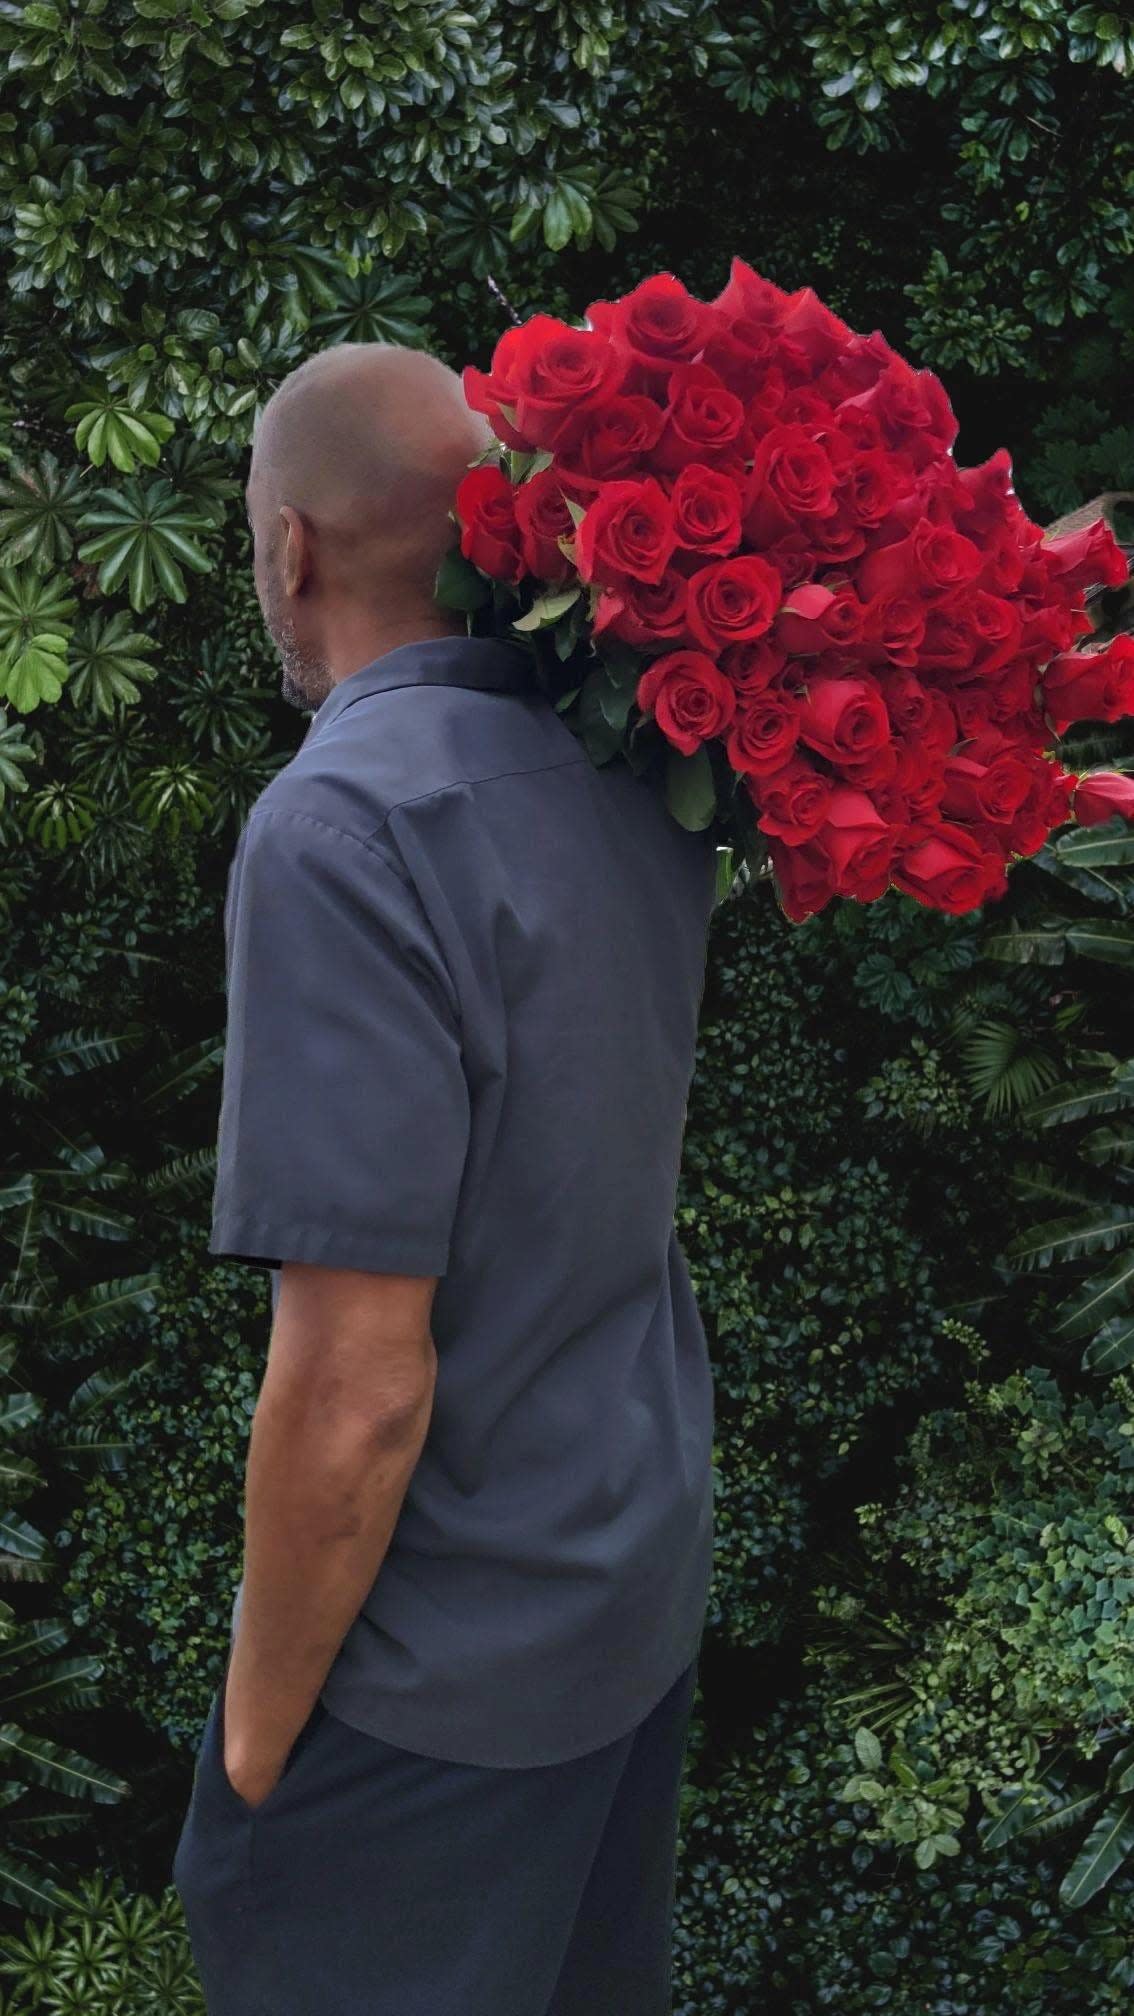 Standing at 6-feet-4, native Detroiter Claude Thompson knows something about walking tall, but the veteran florist says he gets an extra lift when making a delivery. "I get a feeling of satisfaction from each arrangement," Thompson says.